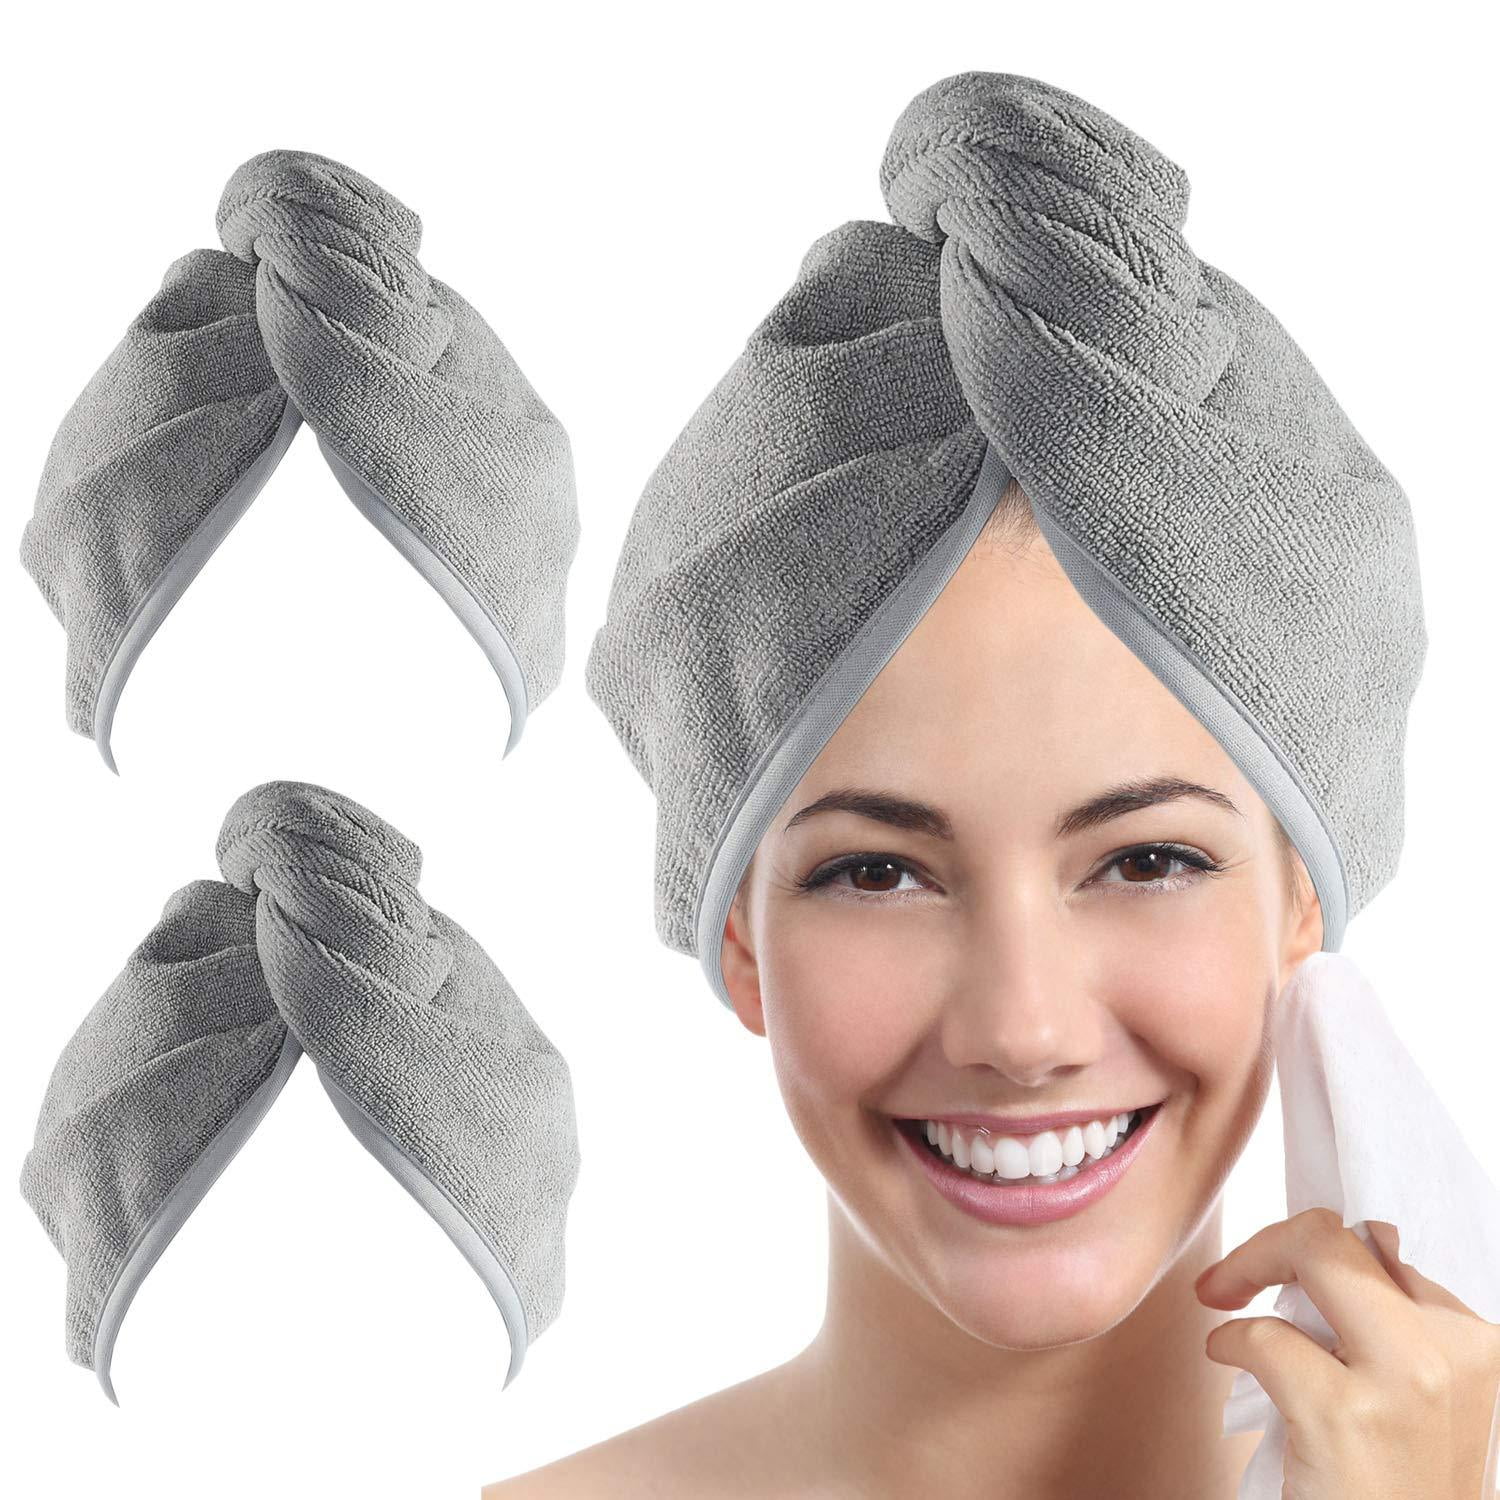 Details about   Women Microfiber Hair Drying Towel Knitted Roll Shape Bathroom Towels Quick Dry 